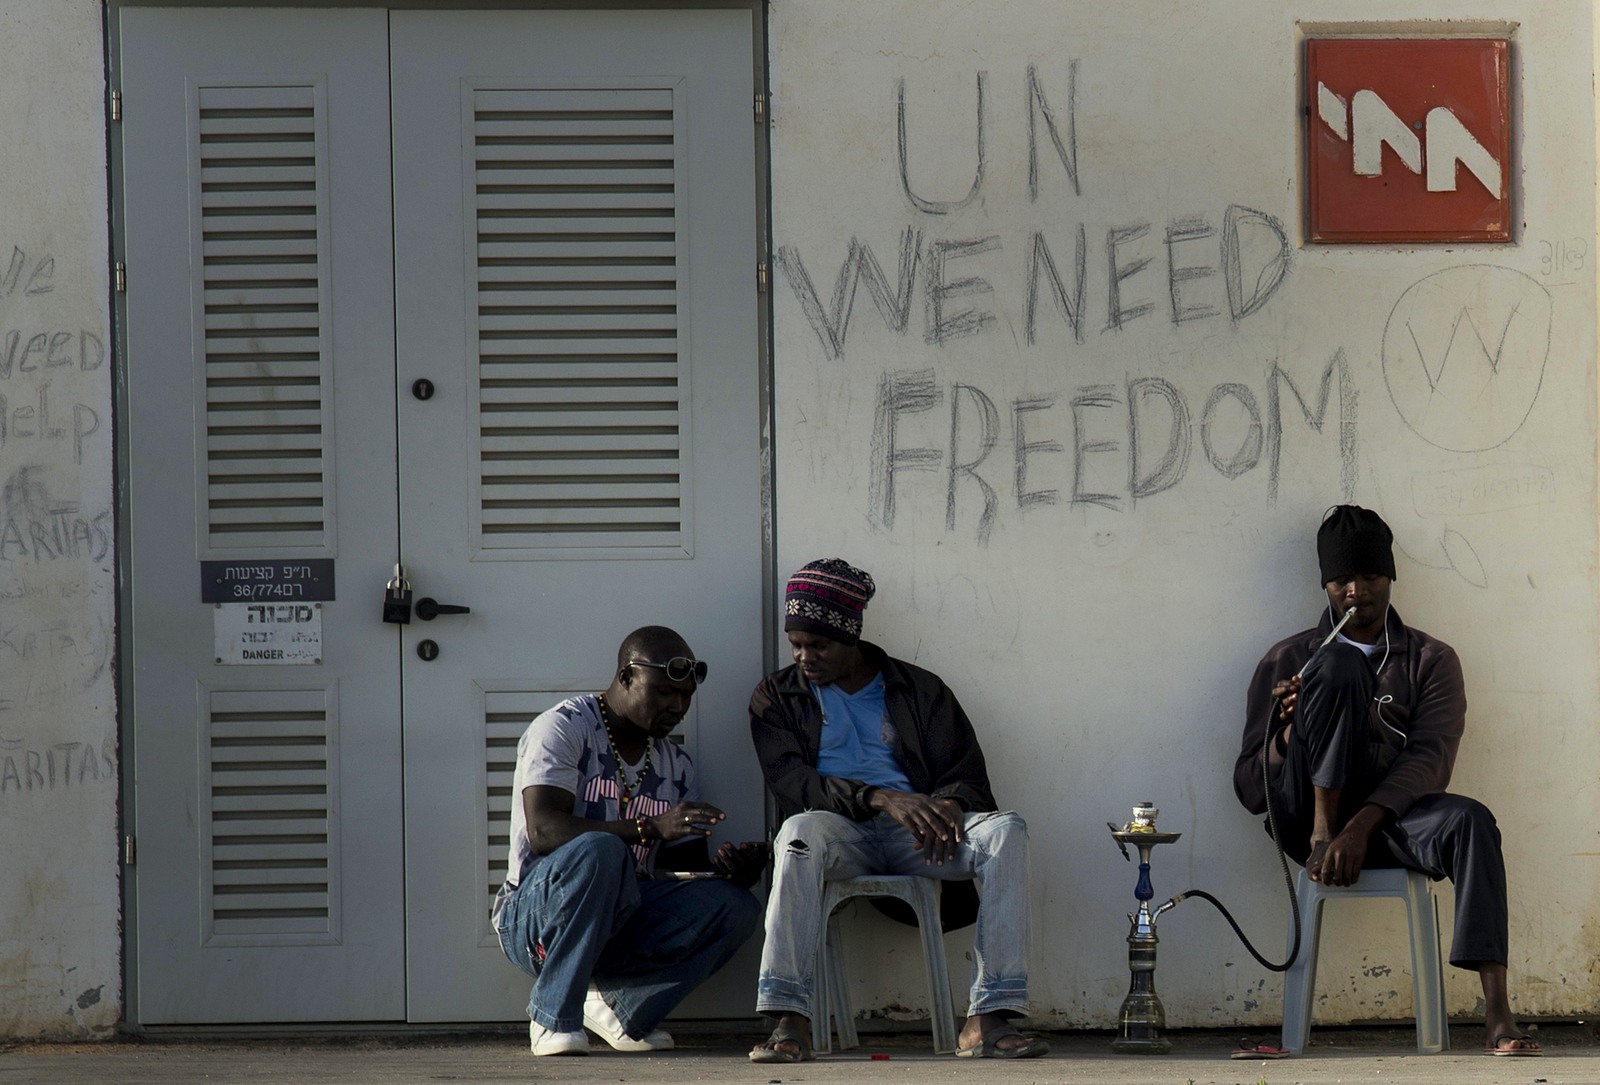 African migrants sit outside Holot detention center in the Negev Desert, southern Israel, Tuesday, April 21, 2015. Tens of thousands of African asylum seekers have made their way to Israel in recent years. Most of them came from Eritrea, an eastern African nation with one of the world’s most dismal human rights records. (AP Photo/Tsafrir Abayov)